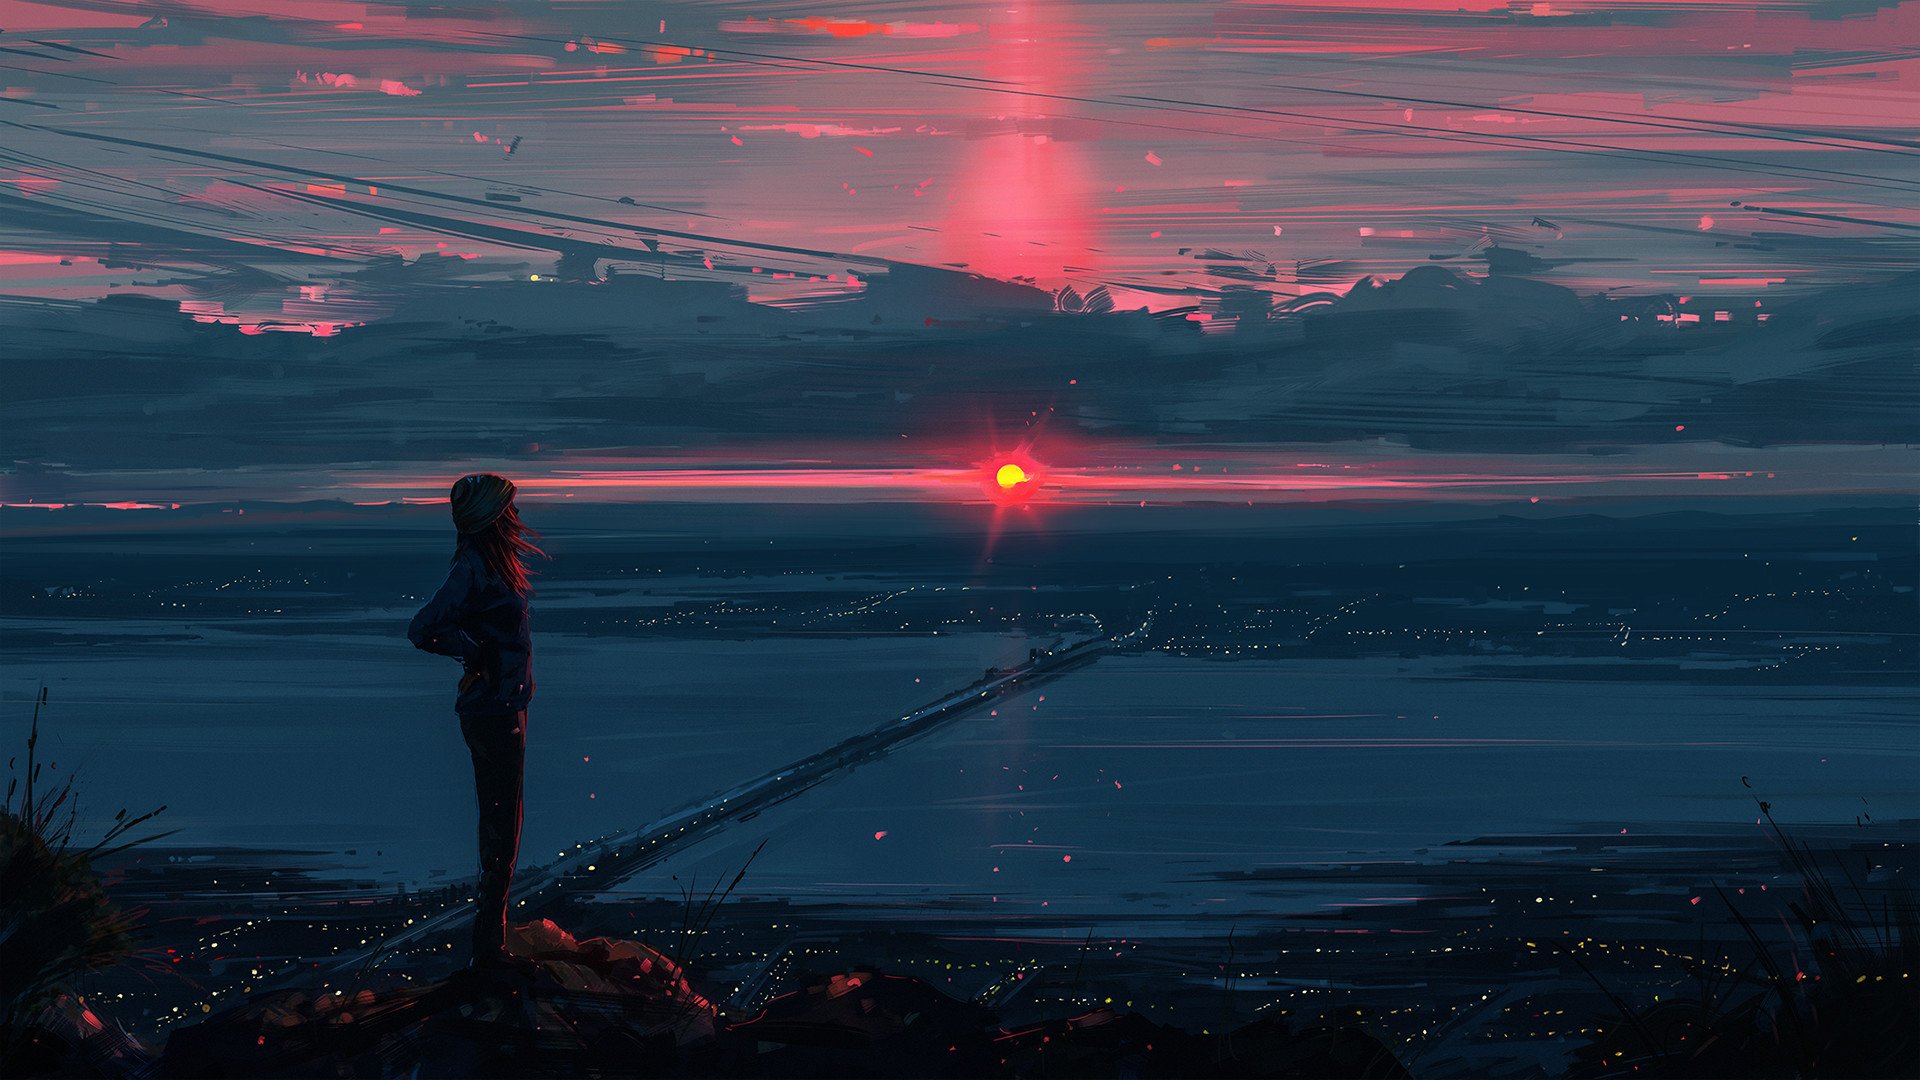 HD anime landscape wallpaper featuring a character overlooking a twilight cityscape with a stunning sunset and vibrant sky.